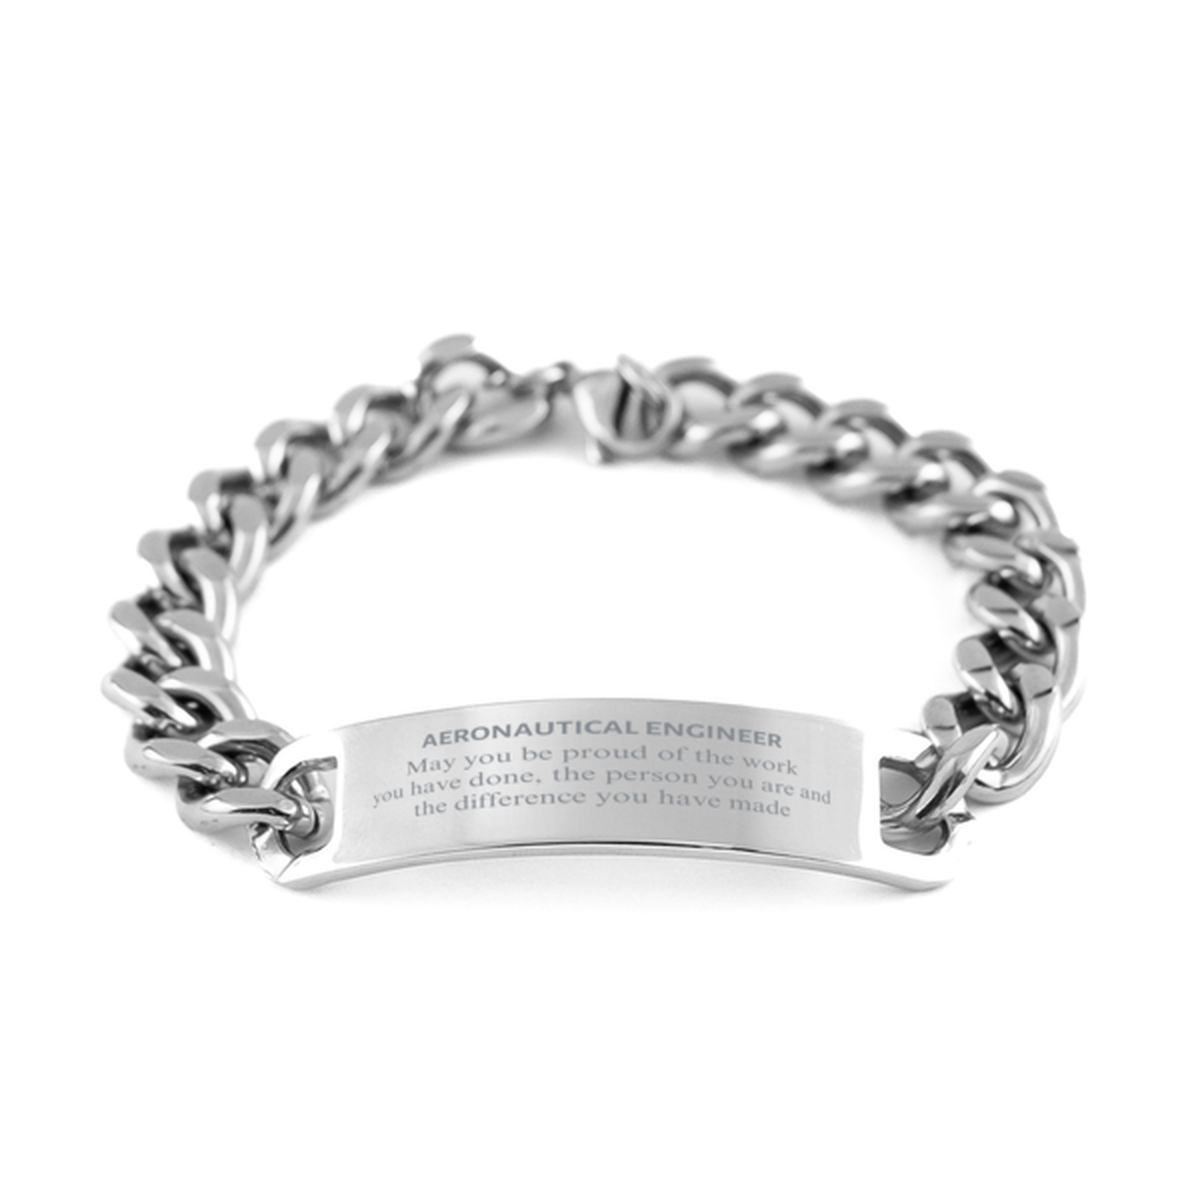 Aeronautical Engineer May you be proud of the work you have done, Retirement Aeronautical Engineer Cuban Chain Stainless Steel Bracelet for Colleague Appreciation Gifts Amazing for Aeronautical Engineer